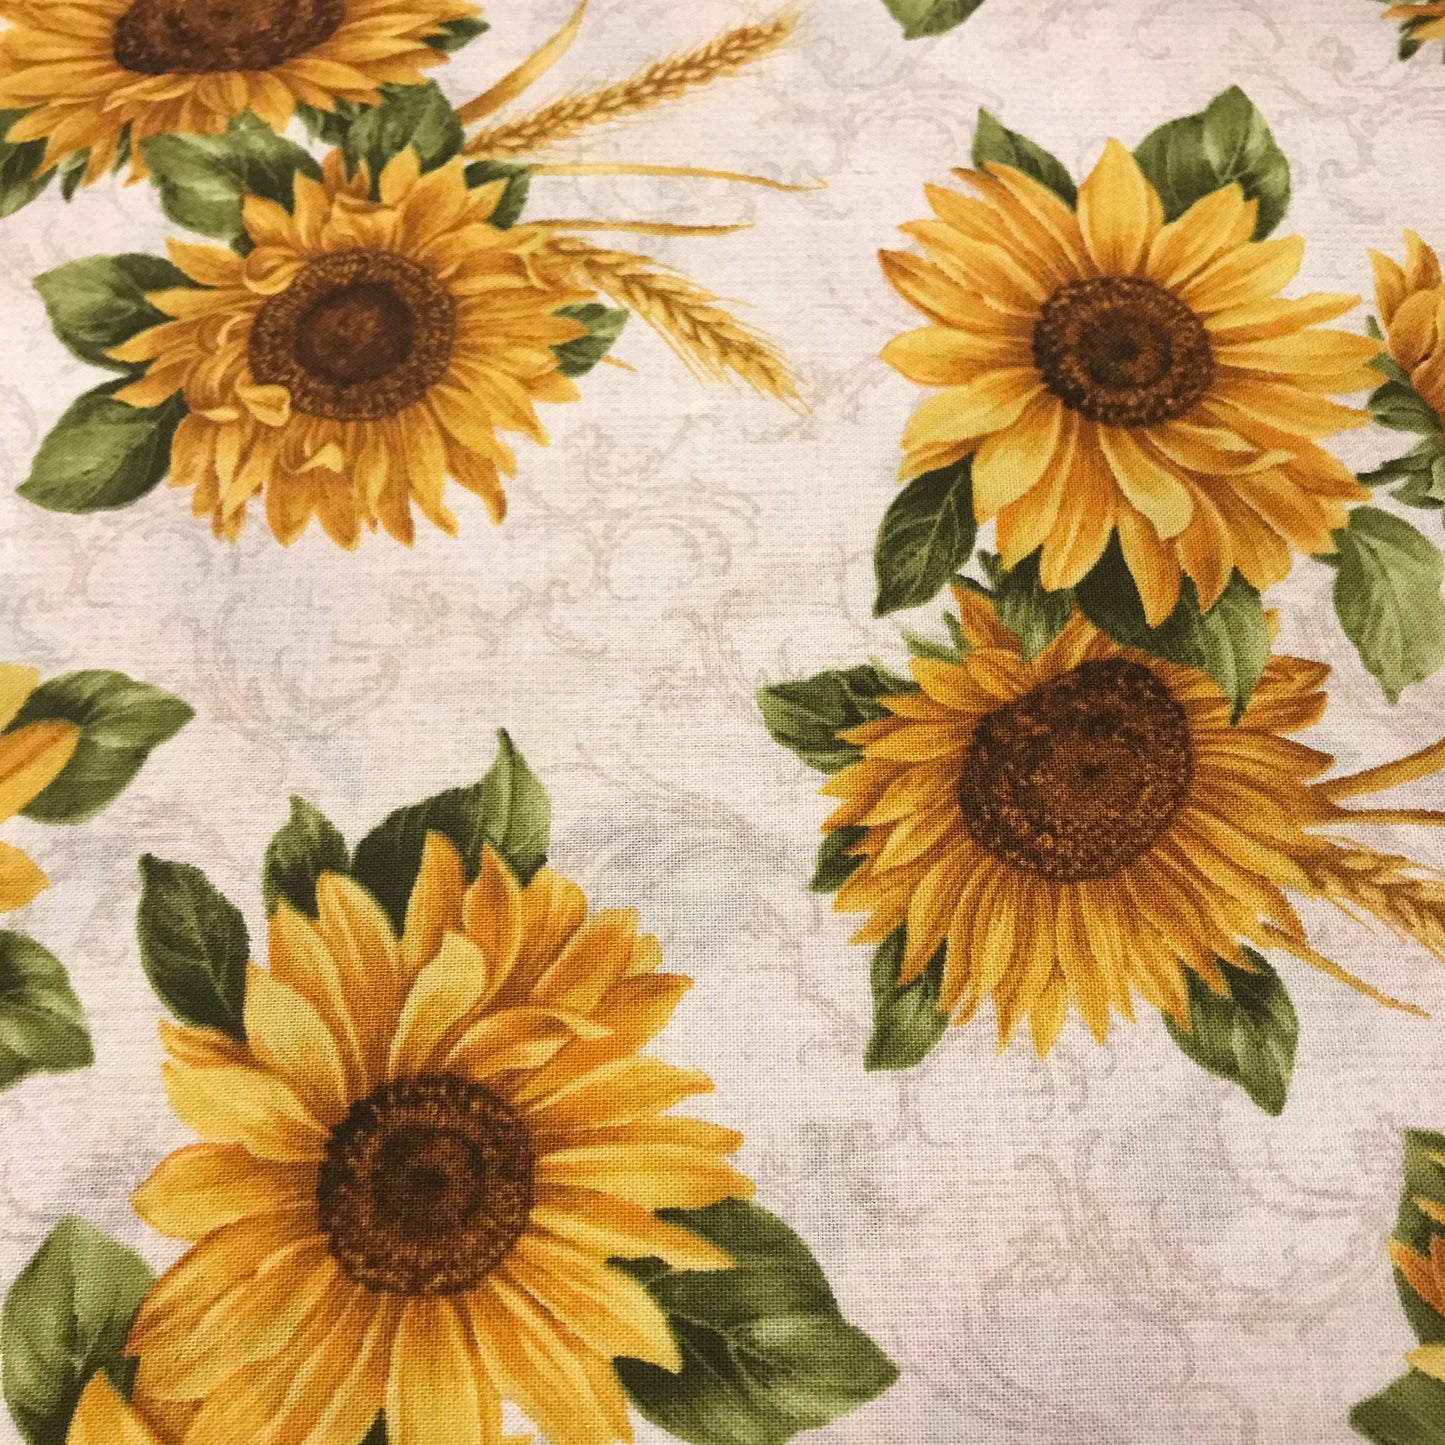 Stand Mixer Bowl Covers - Sunny Sunflowers